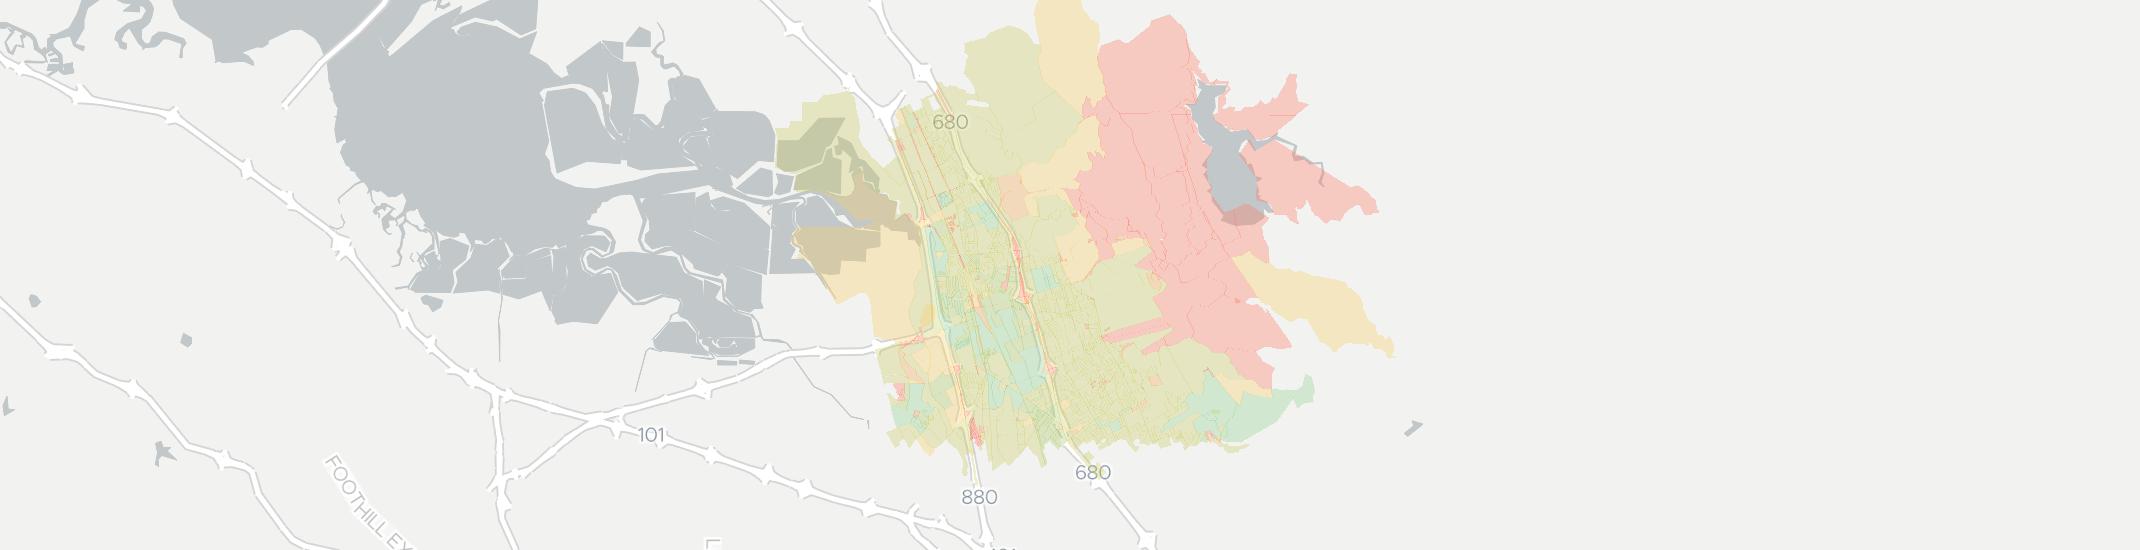 Milpitas Internet Competition Map. Click for interactive map